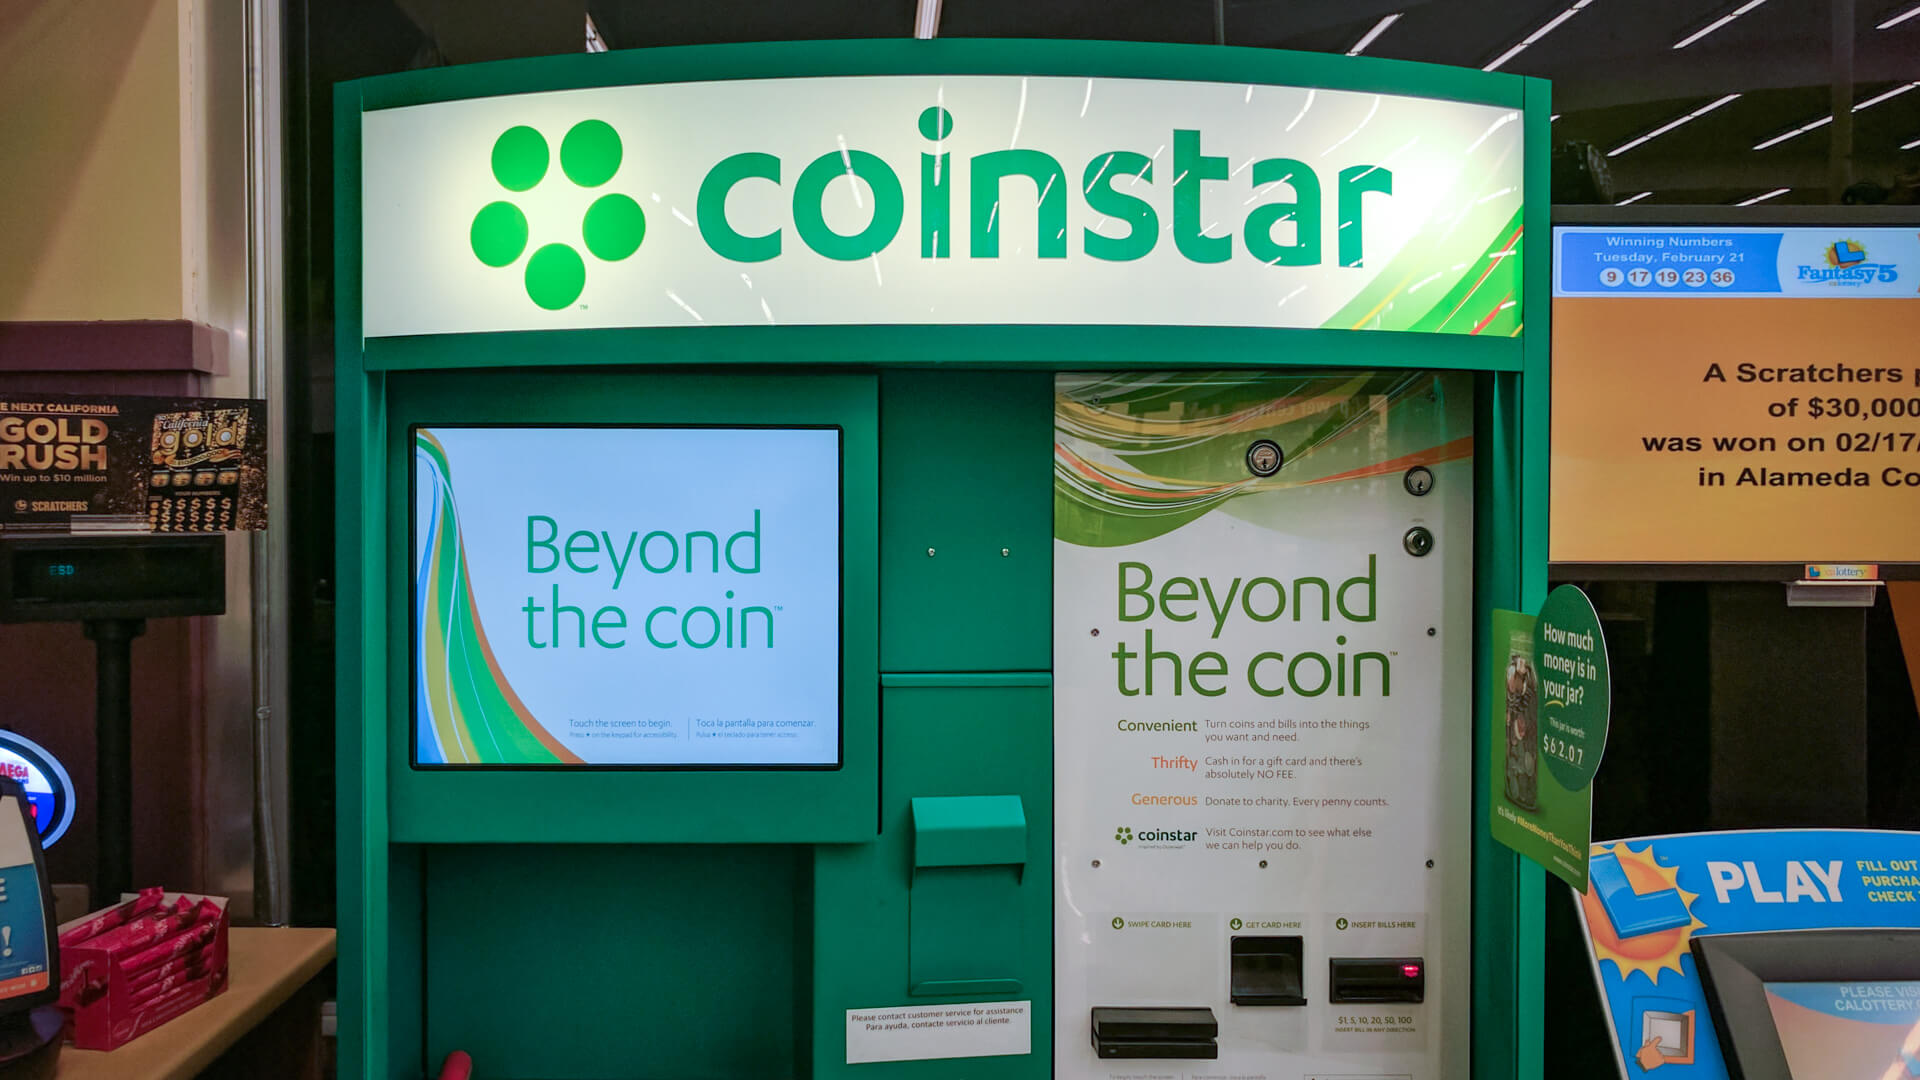 Coinstar Near Me Find Coinstar Locations And Other Coin Machines Gobankingrates,How To Make Jalapeno Poppers